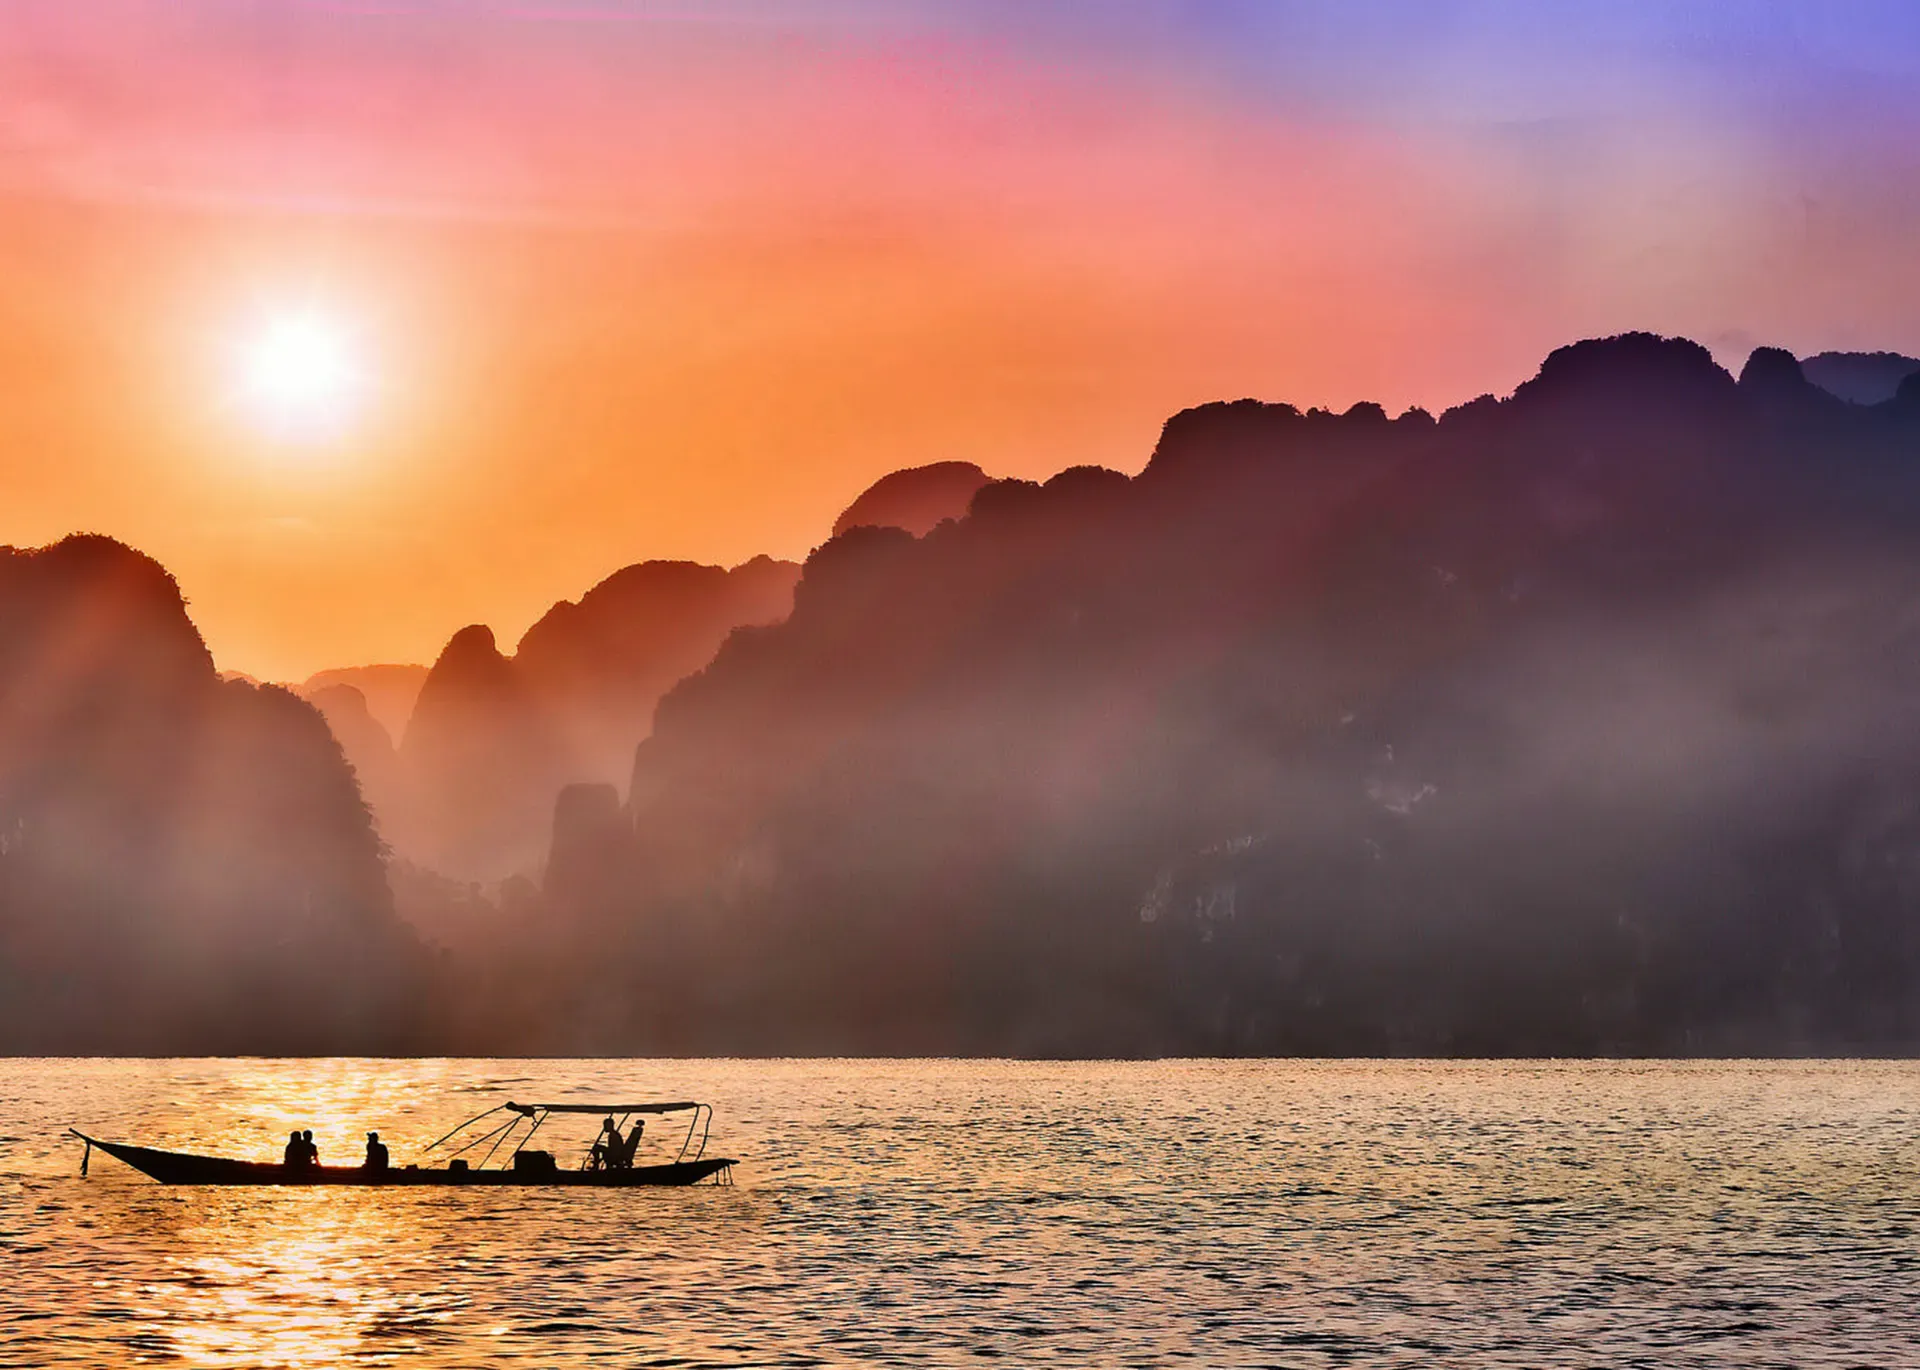 Sunset behind the karst towers of Thailand's seas with a boat silhouetted in the foreground.